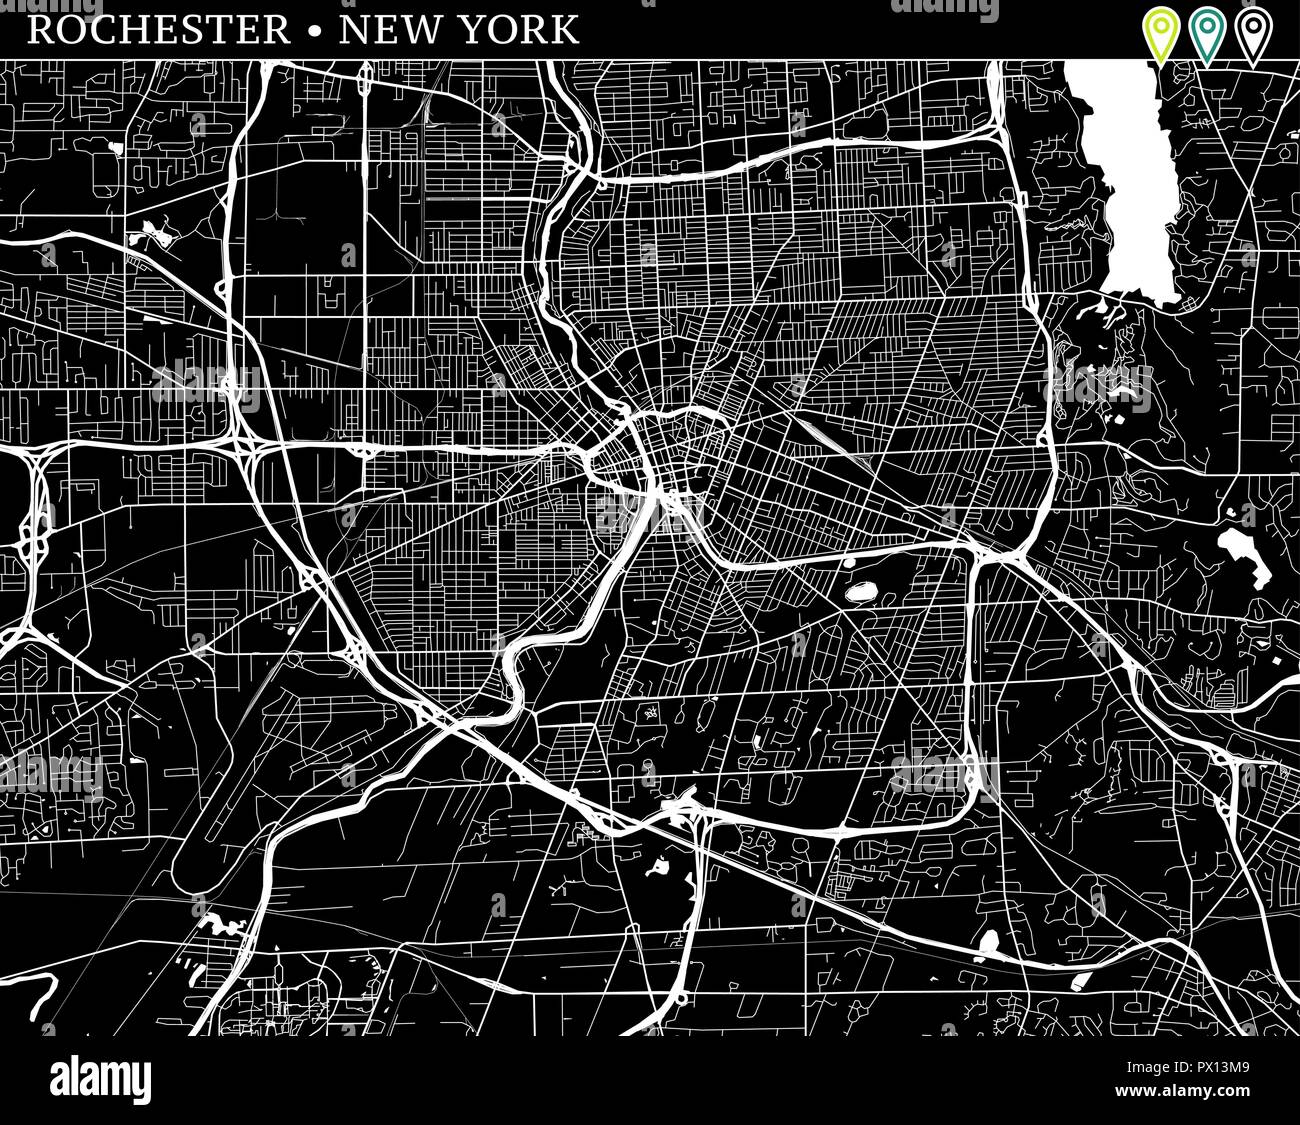 simple map of new york black and white Simple Map Of Rochester New York Usa Black And White Version simple map of new york black and white